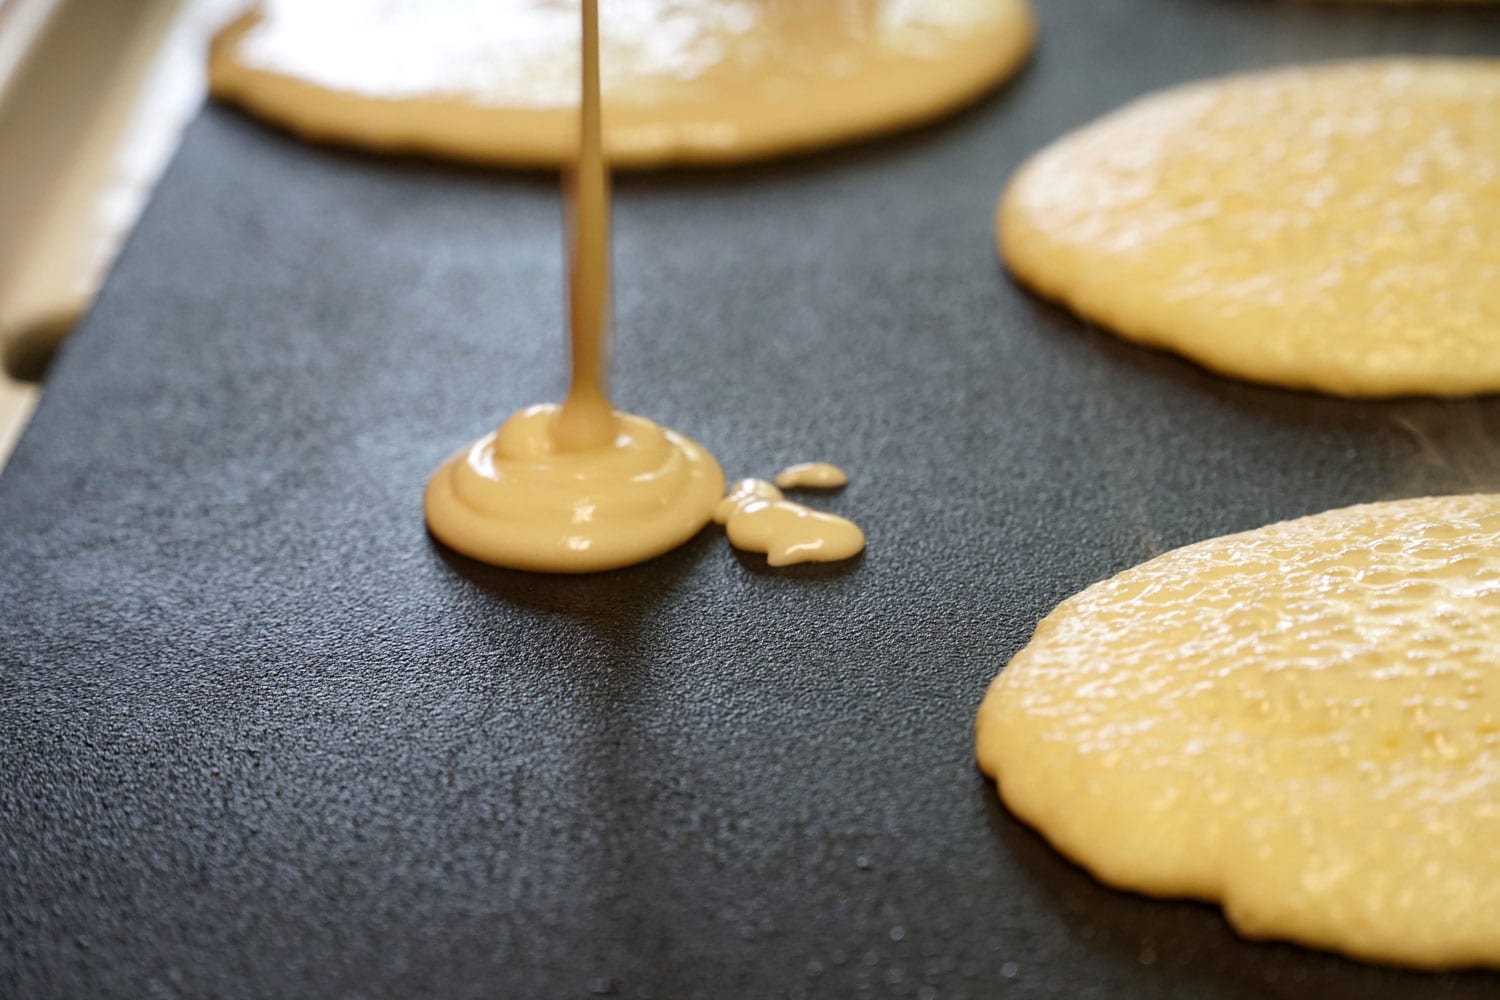 Pancake batter baking mix being poured from a bowl onto a hot electric griddle